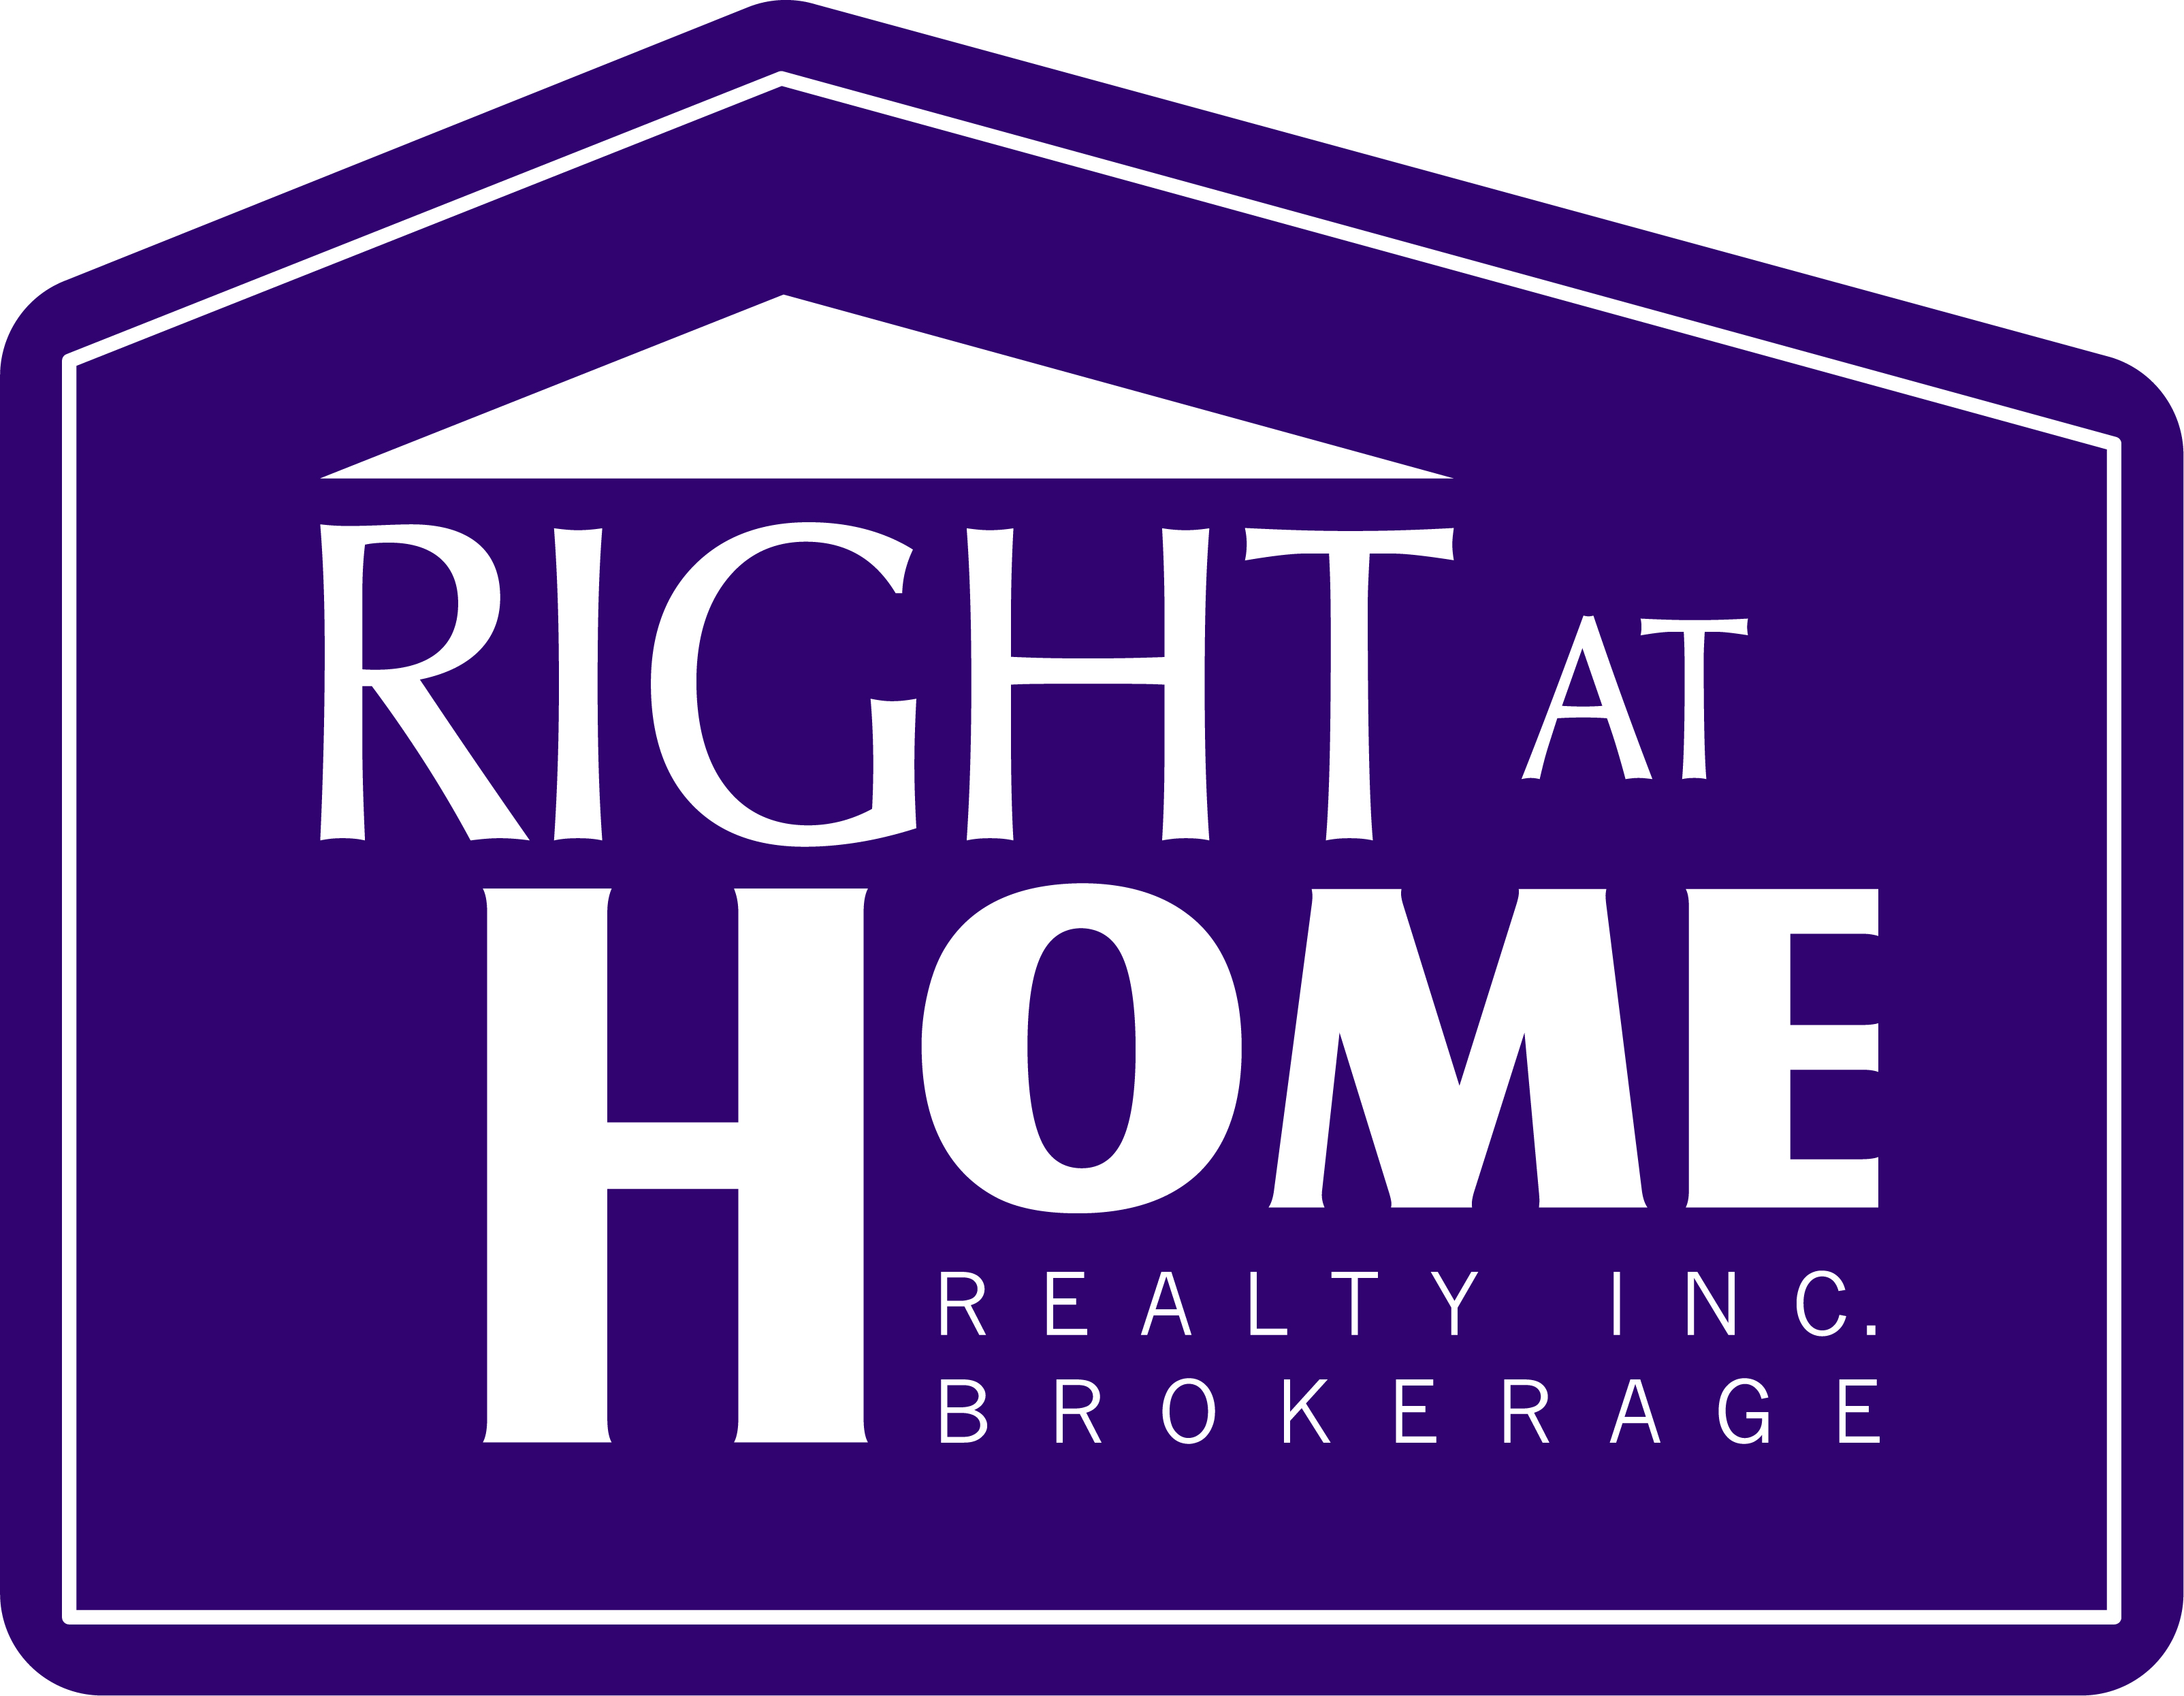 Right at Home Realty Inc.